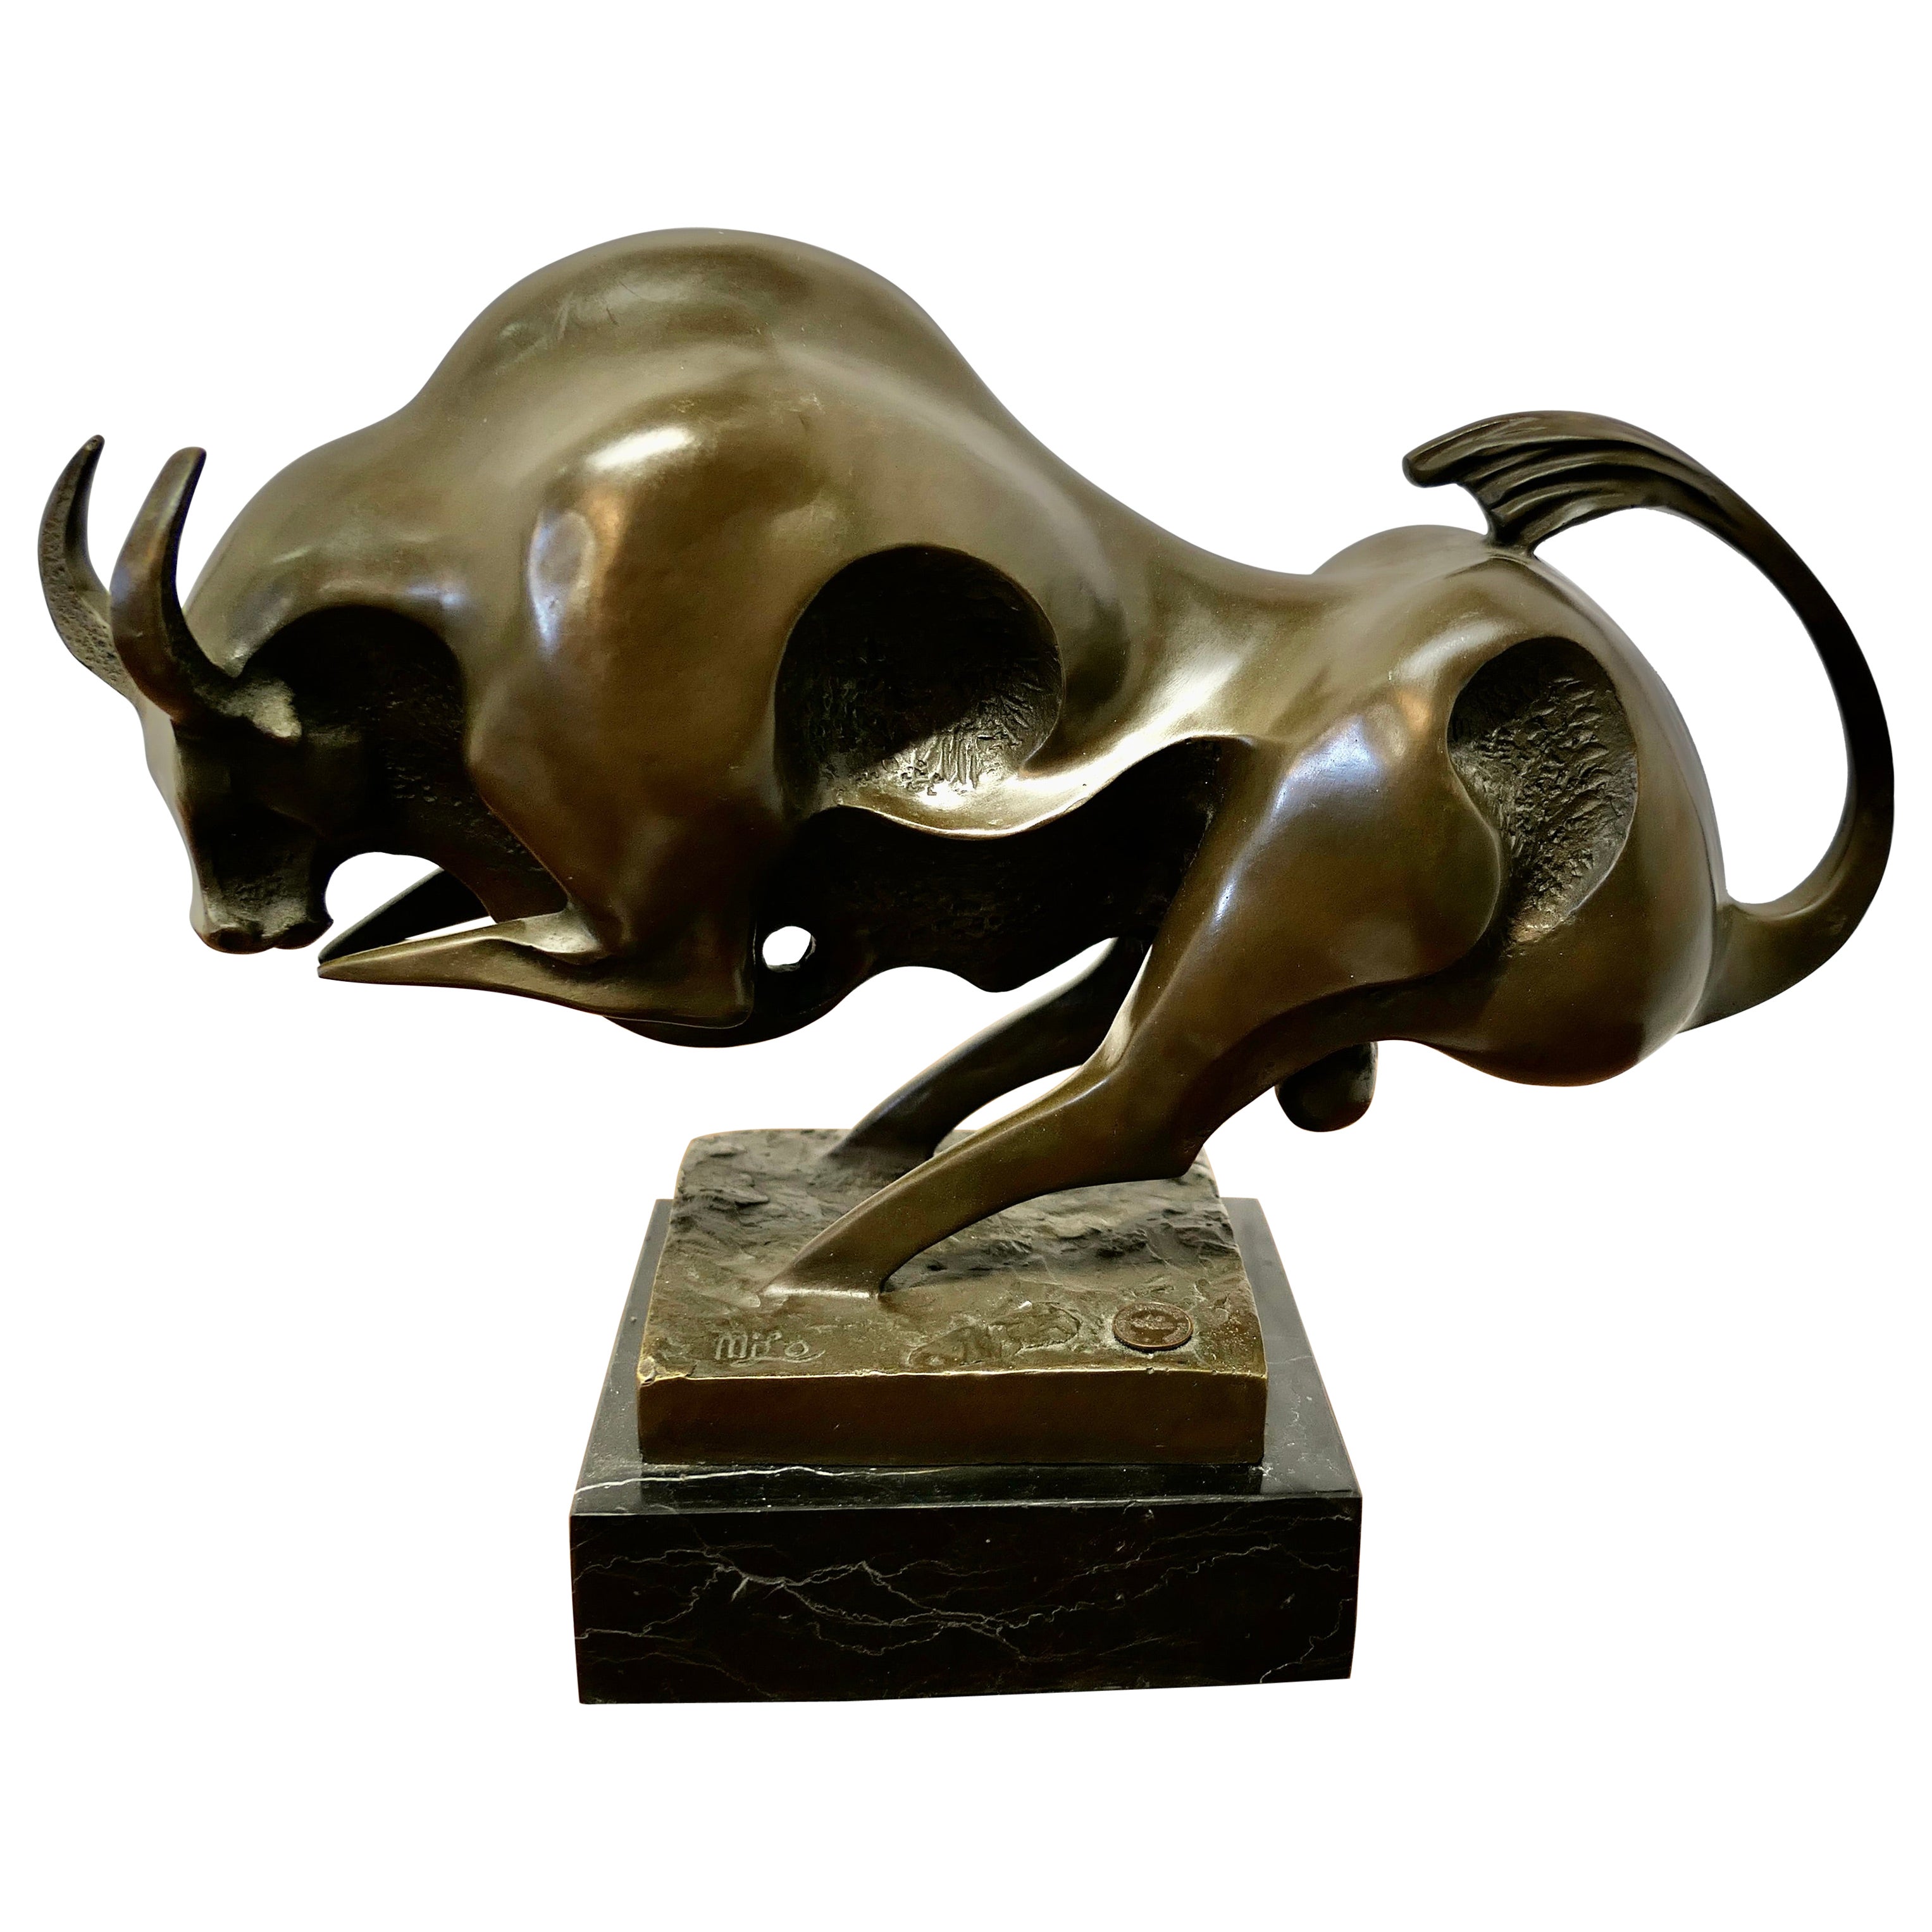 Modernist Abstract Bronze Sculpture of a Bull on a Marble Plinth